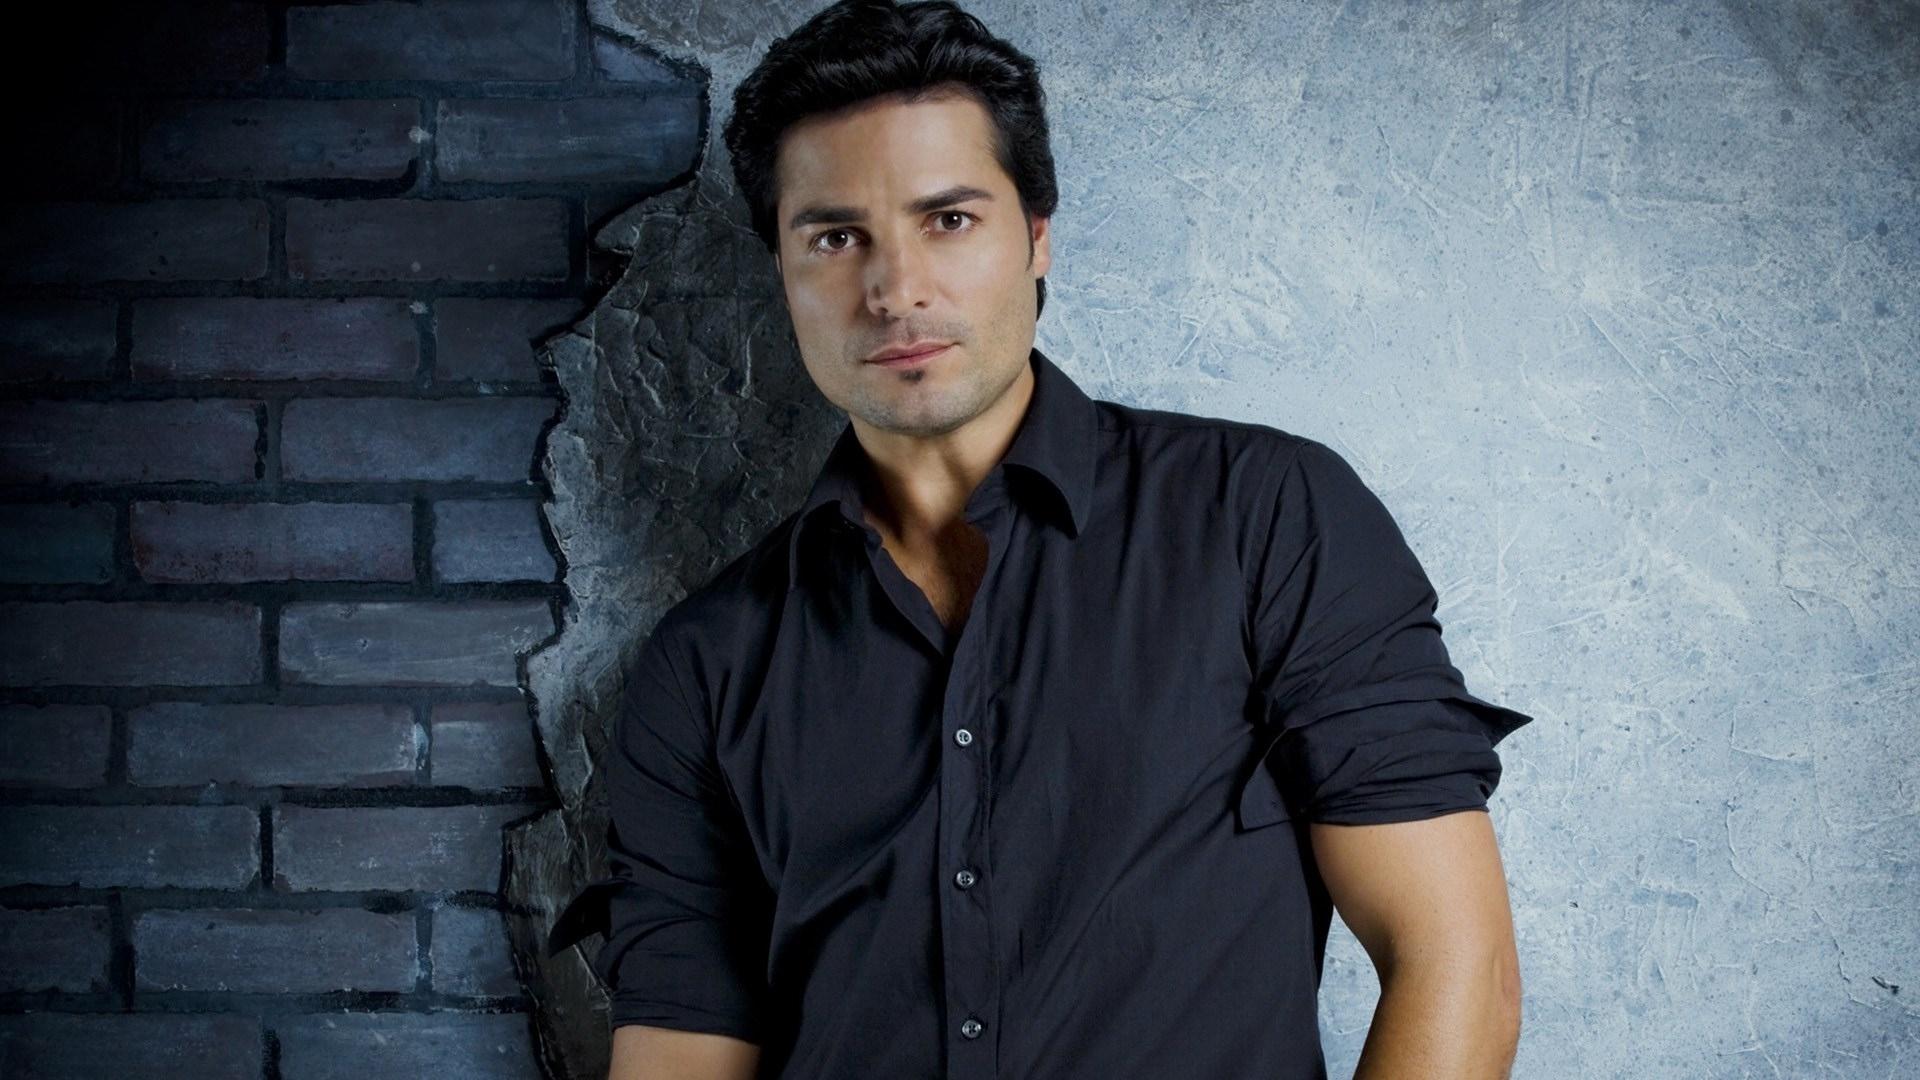 Download wallpaper 1920x1080 chayanne, shirt, wall, look